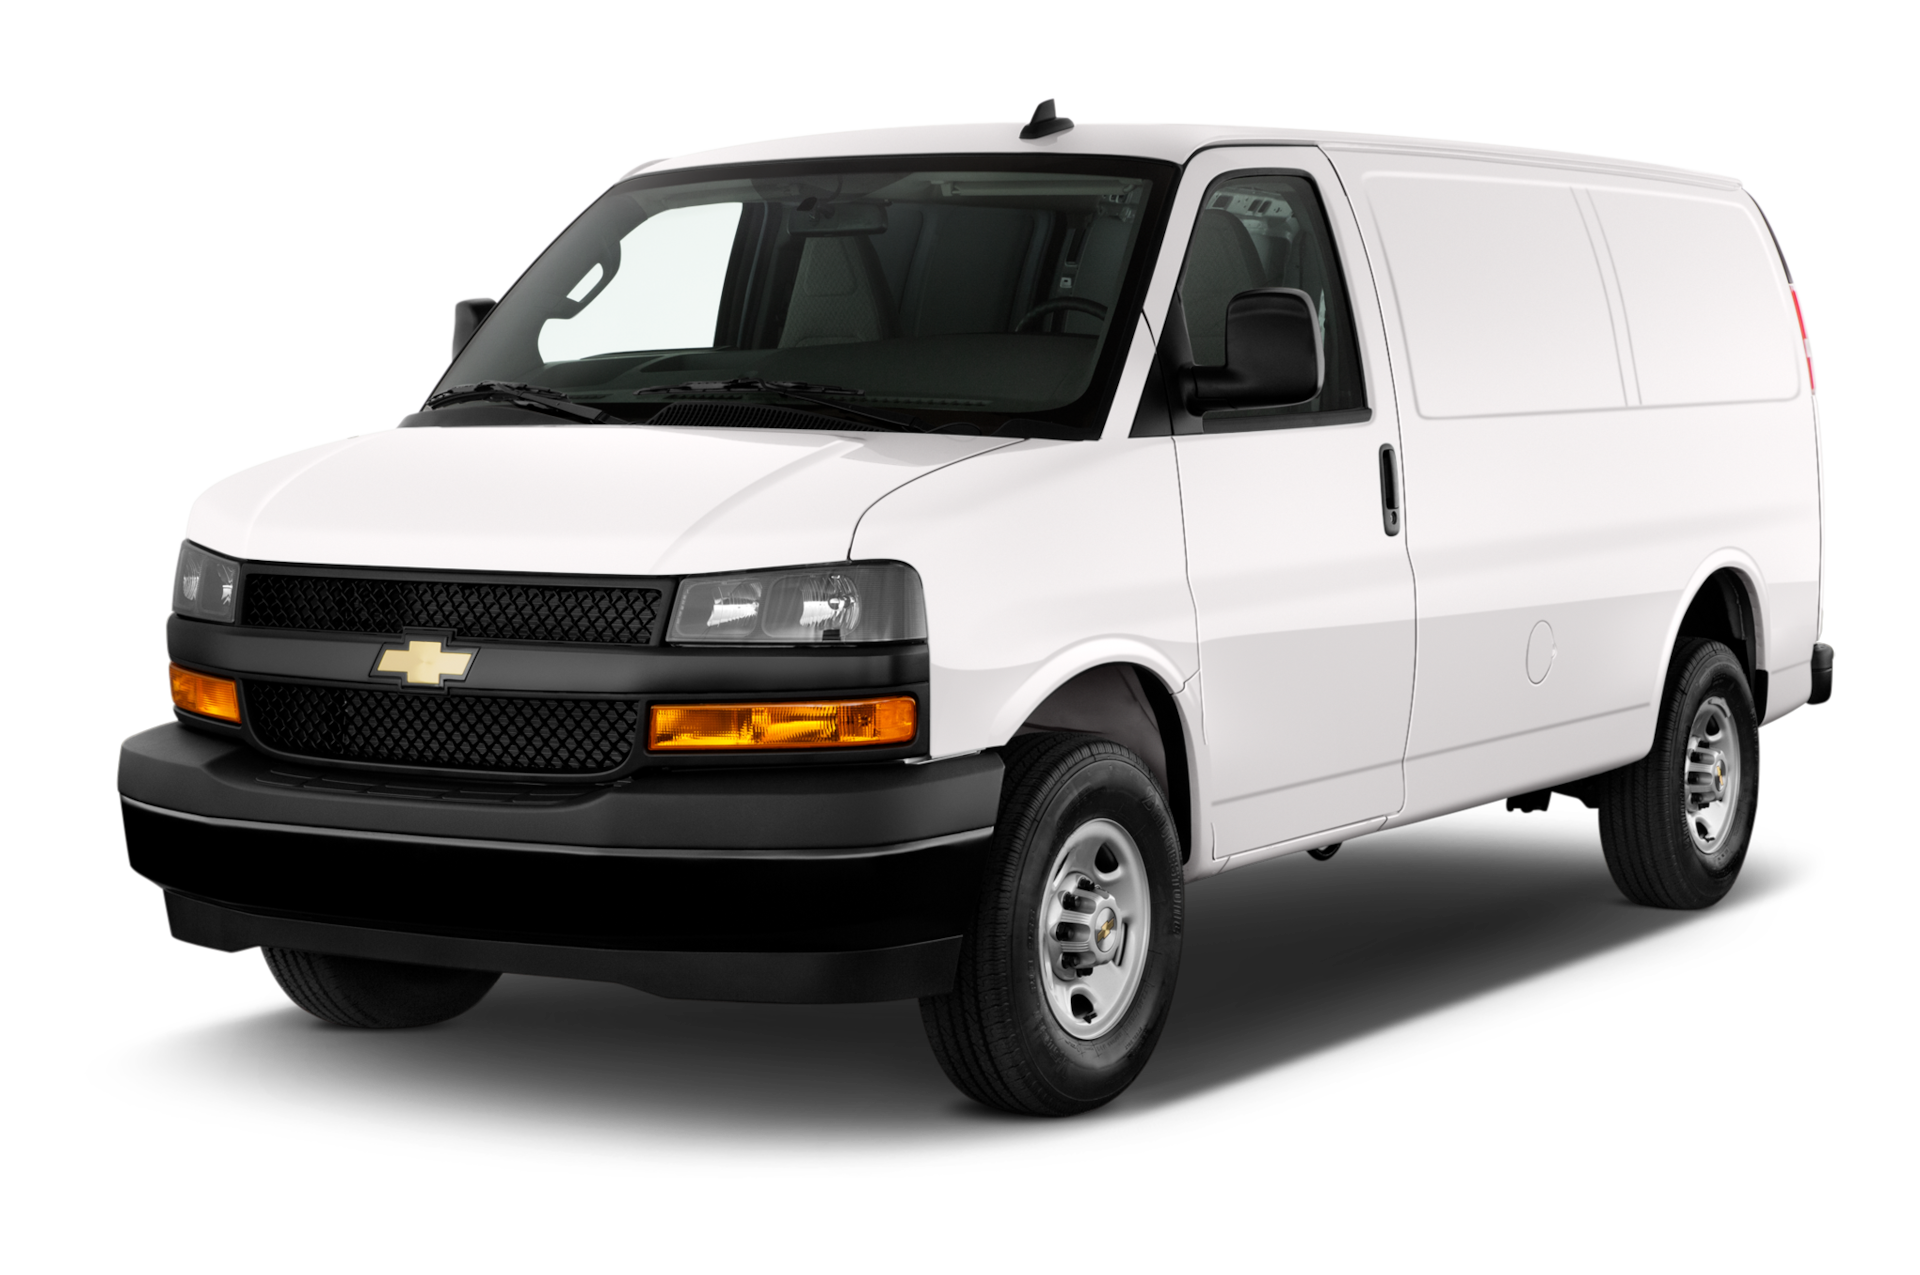 2023 Chevrolet Express Prices, Reviews, and Photos - MotorTrend